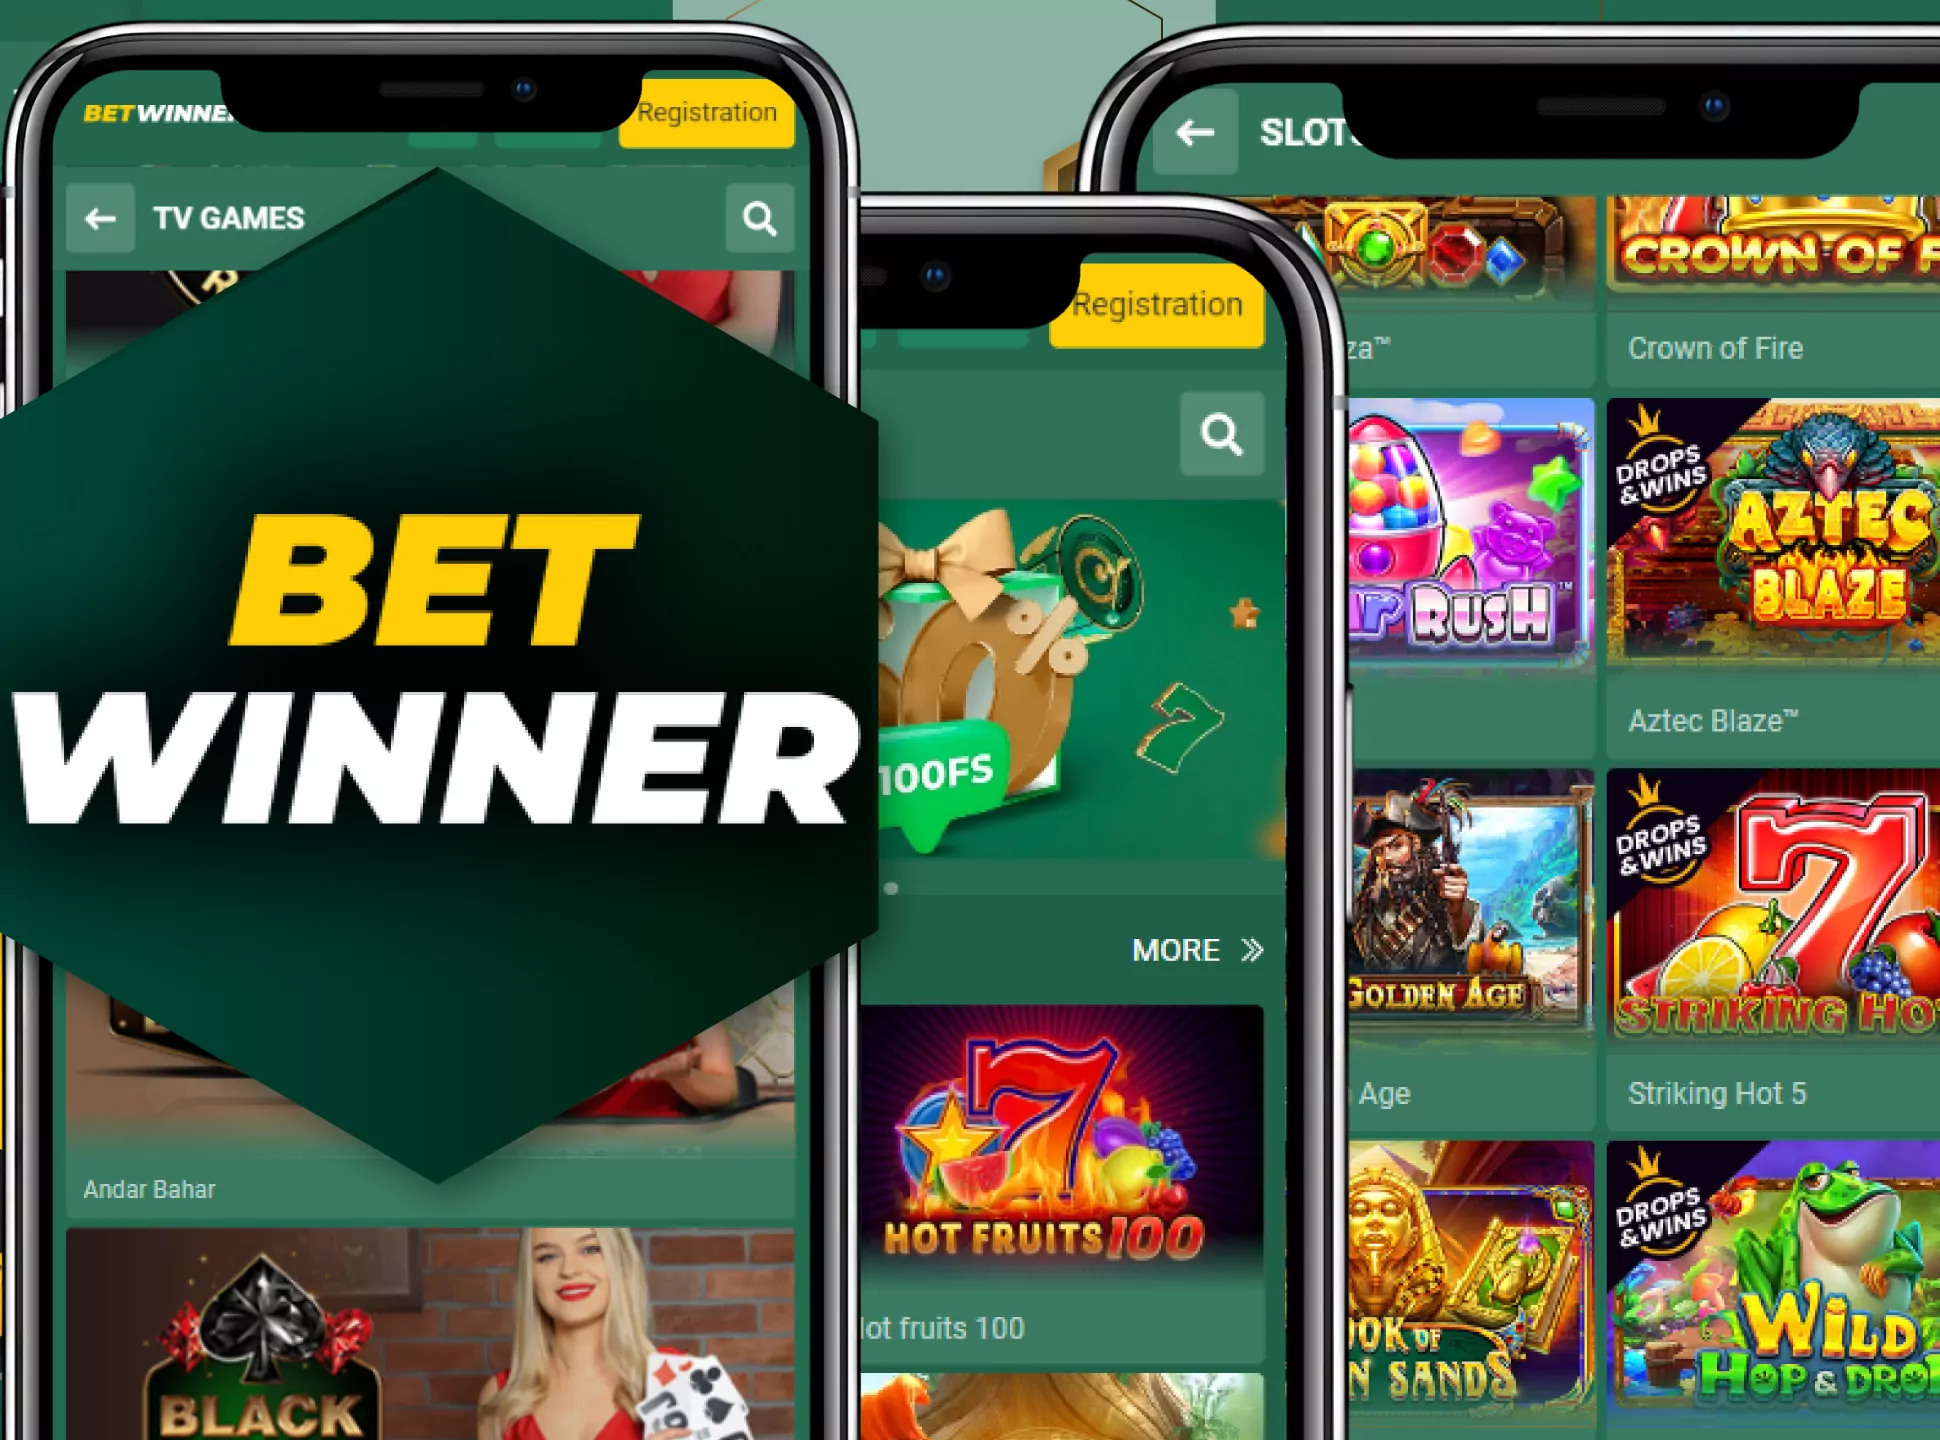 Betwinner online casino offers a lot of games and bonuses.